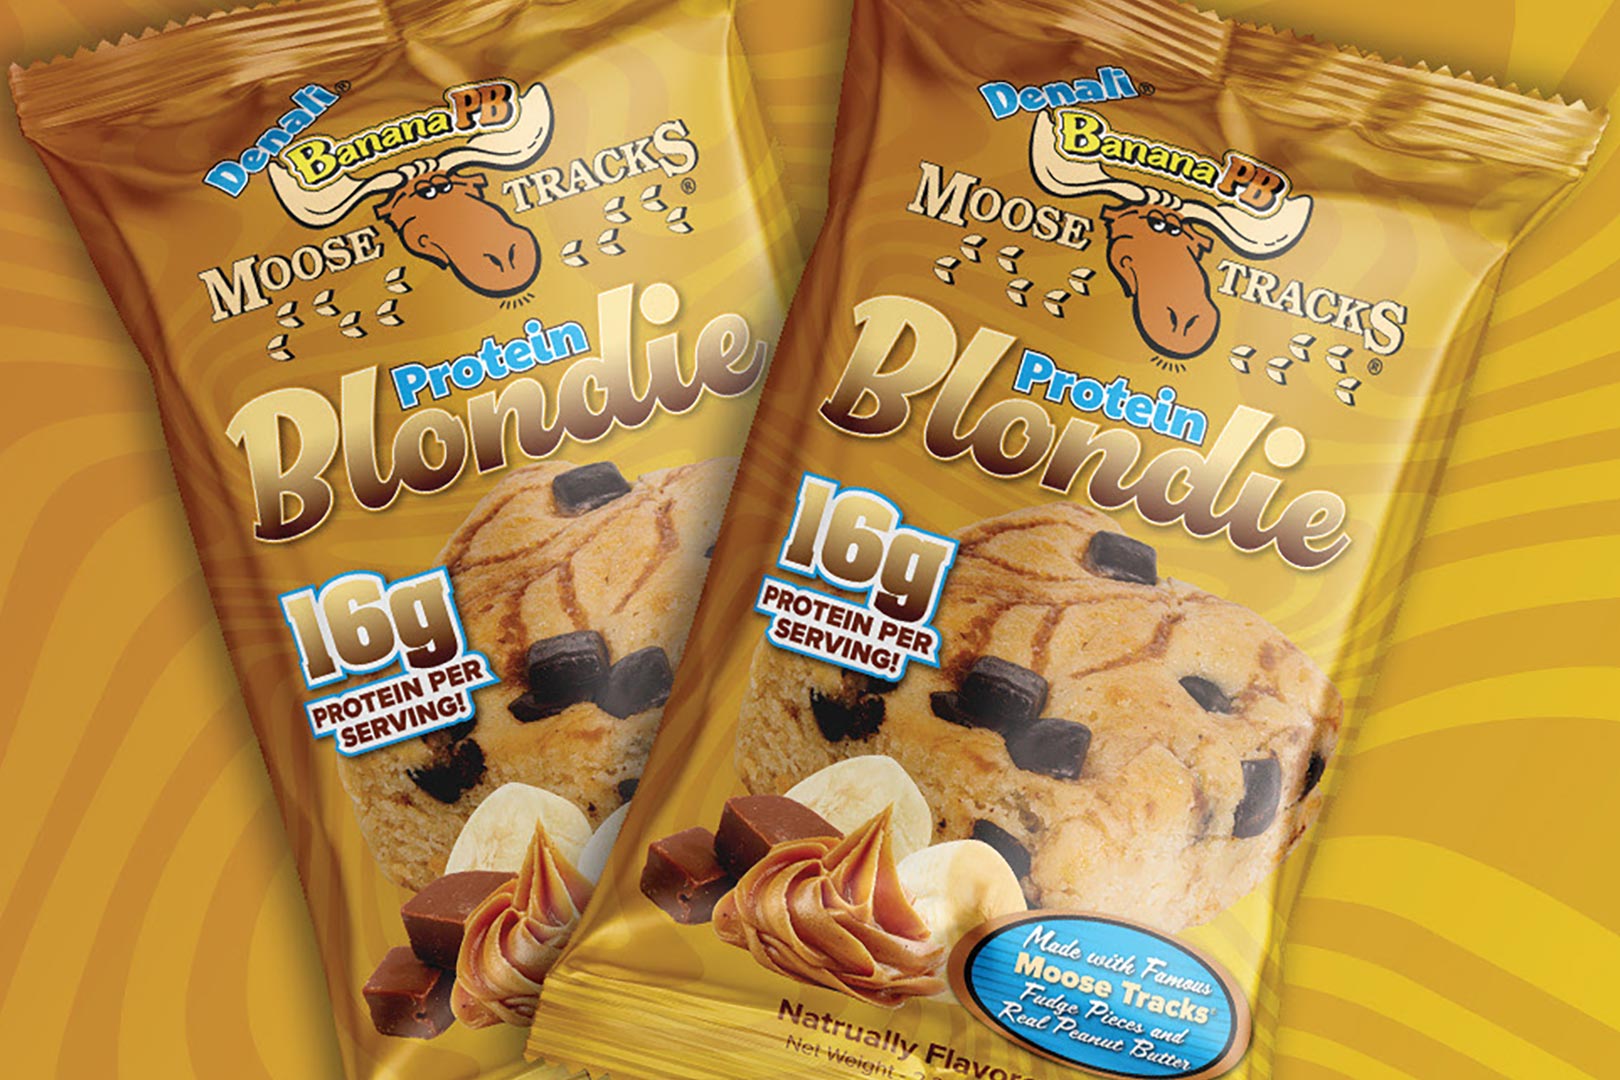 Core Nutritionals Moost Tracks Banana Peanut Butter Protein Blondie